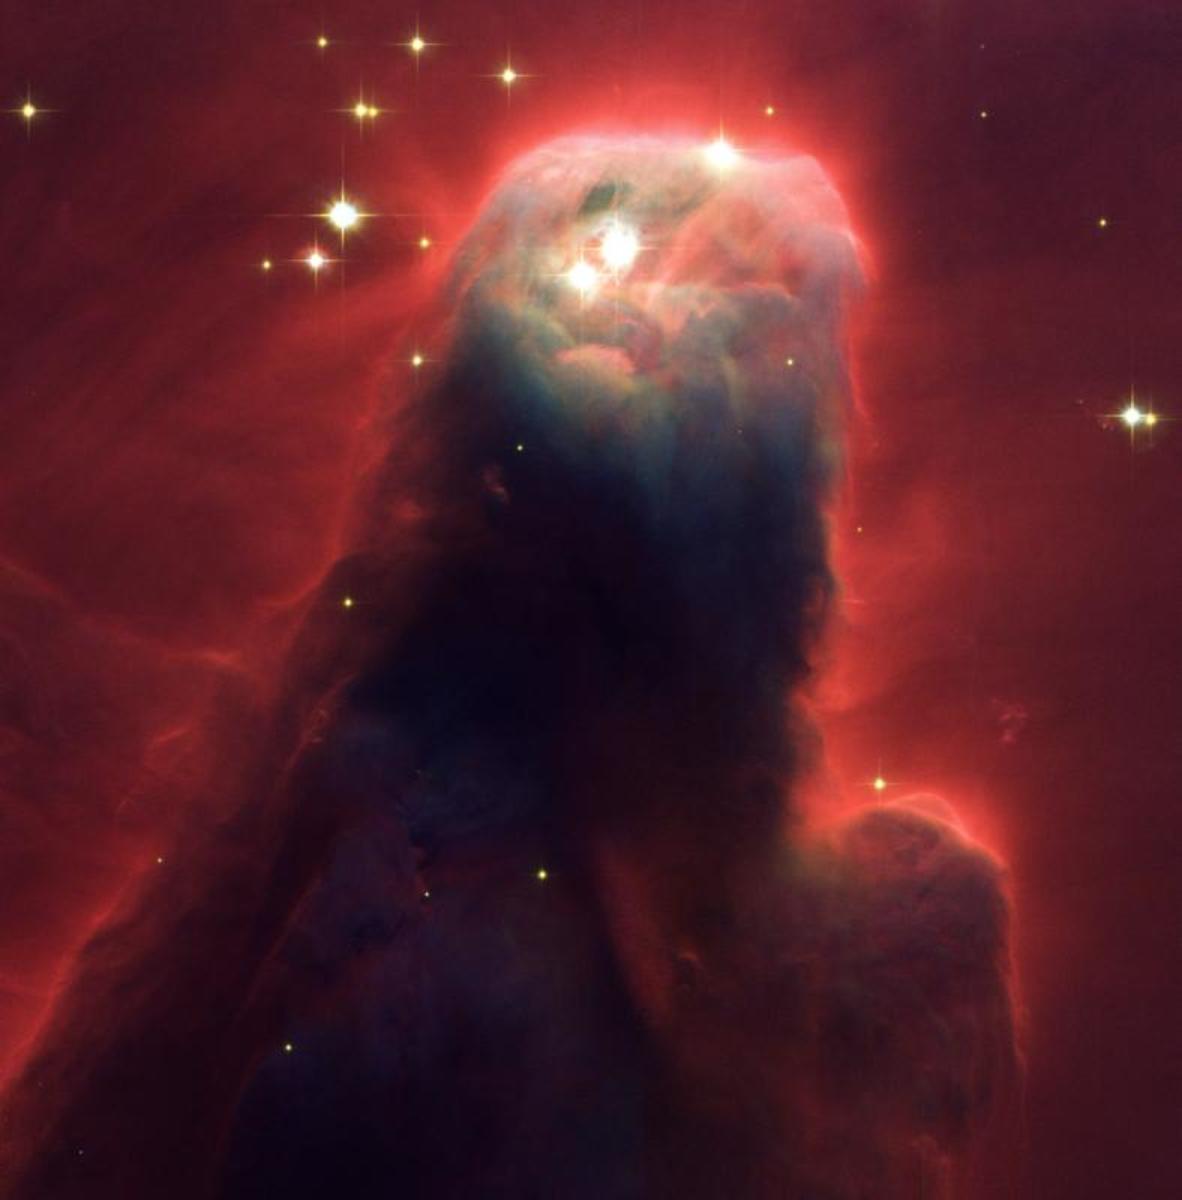 Cone Nebula (NGC 2264): Star-Forming Pillar of Gas and Dust